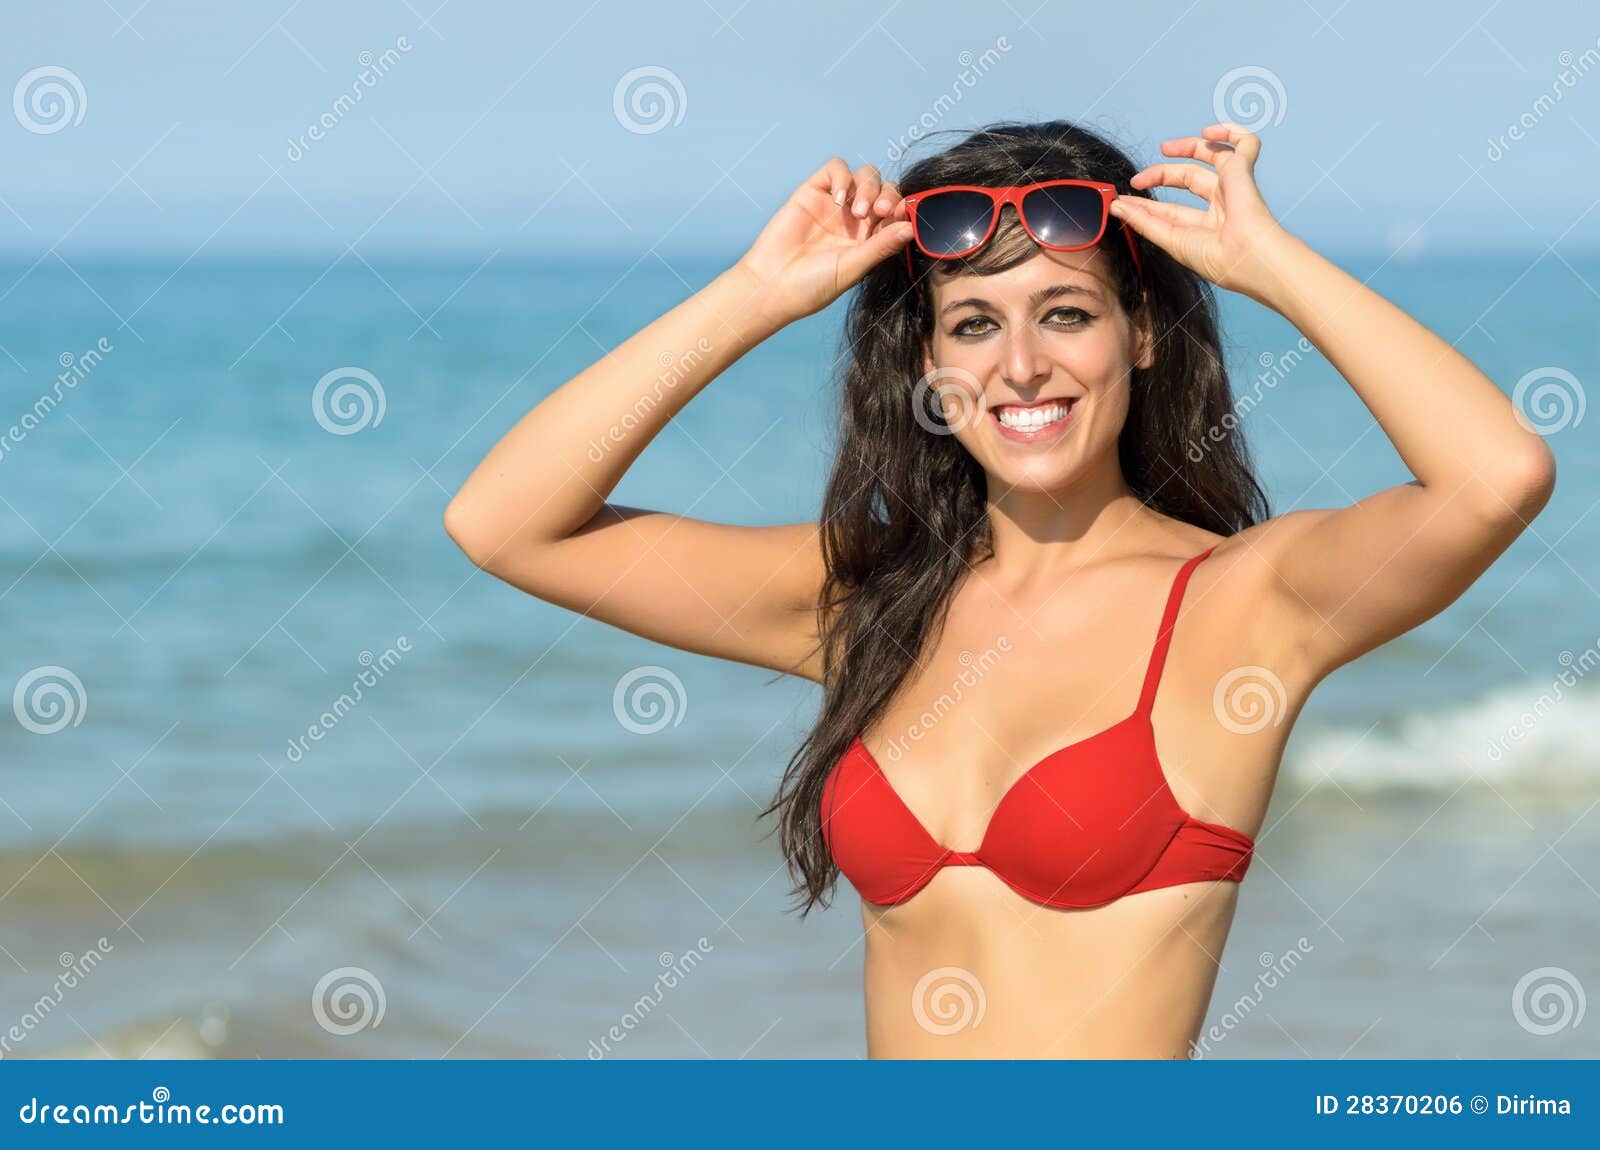 Hot Summer In Beach Royalty Free Stock Image Image 28370206